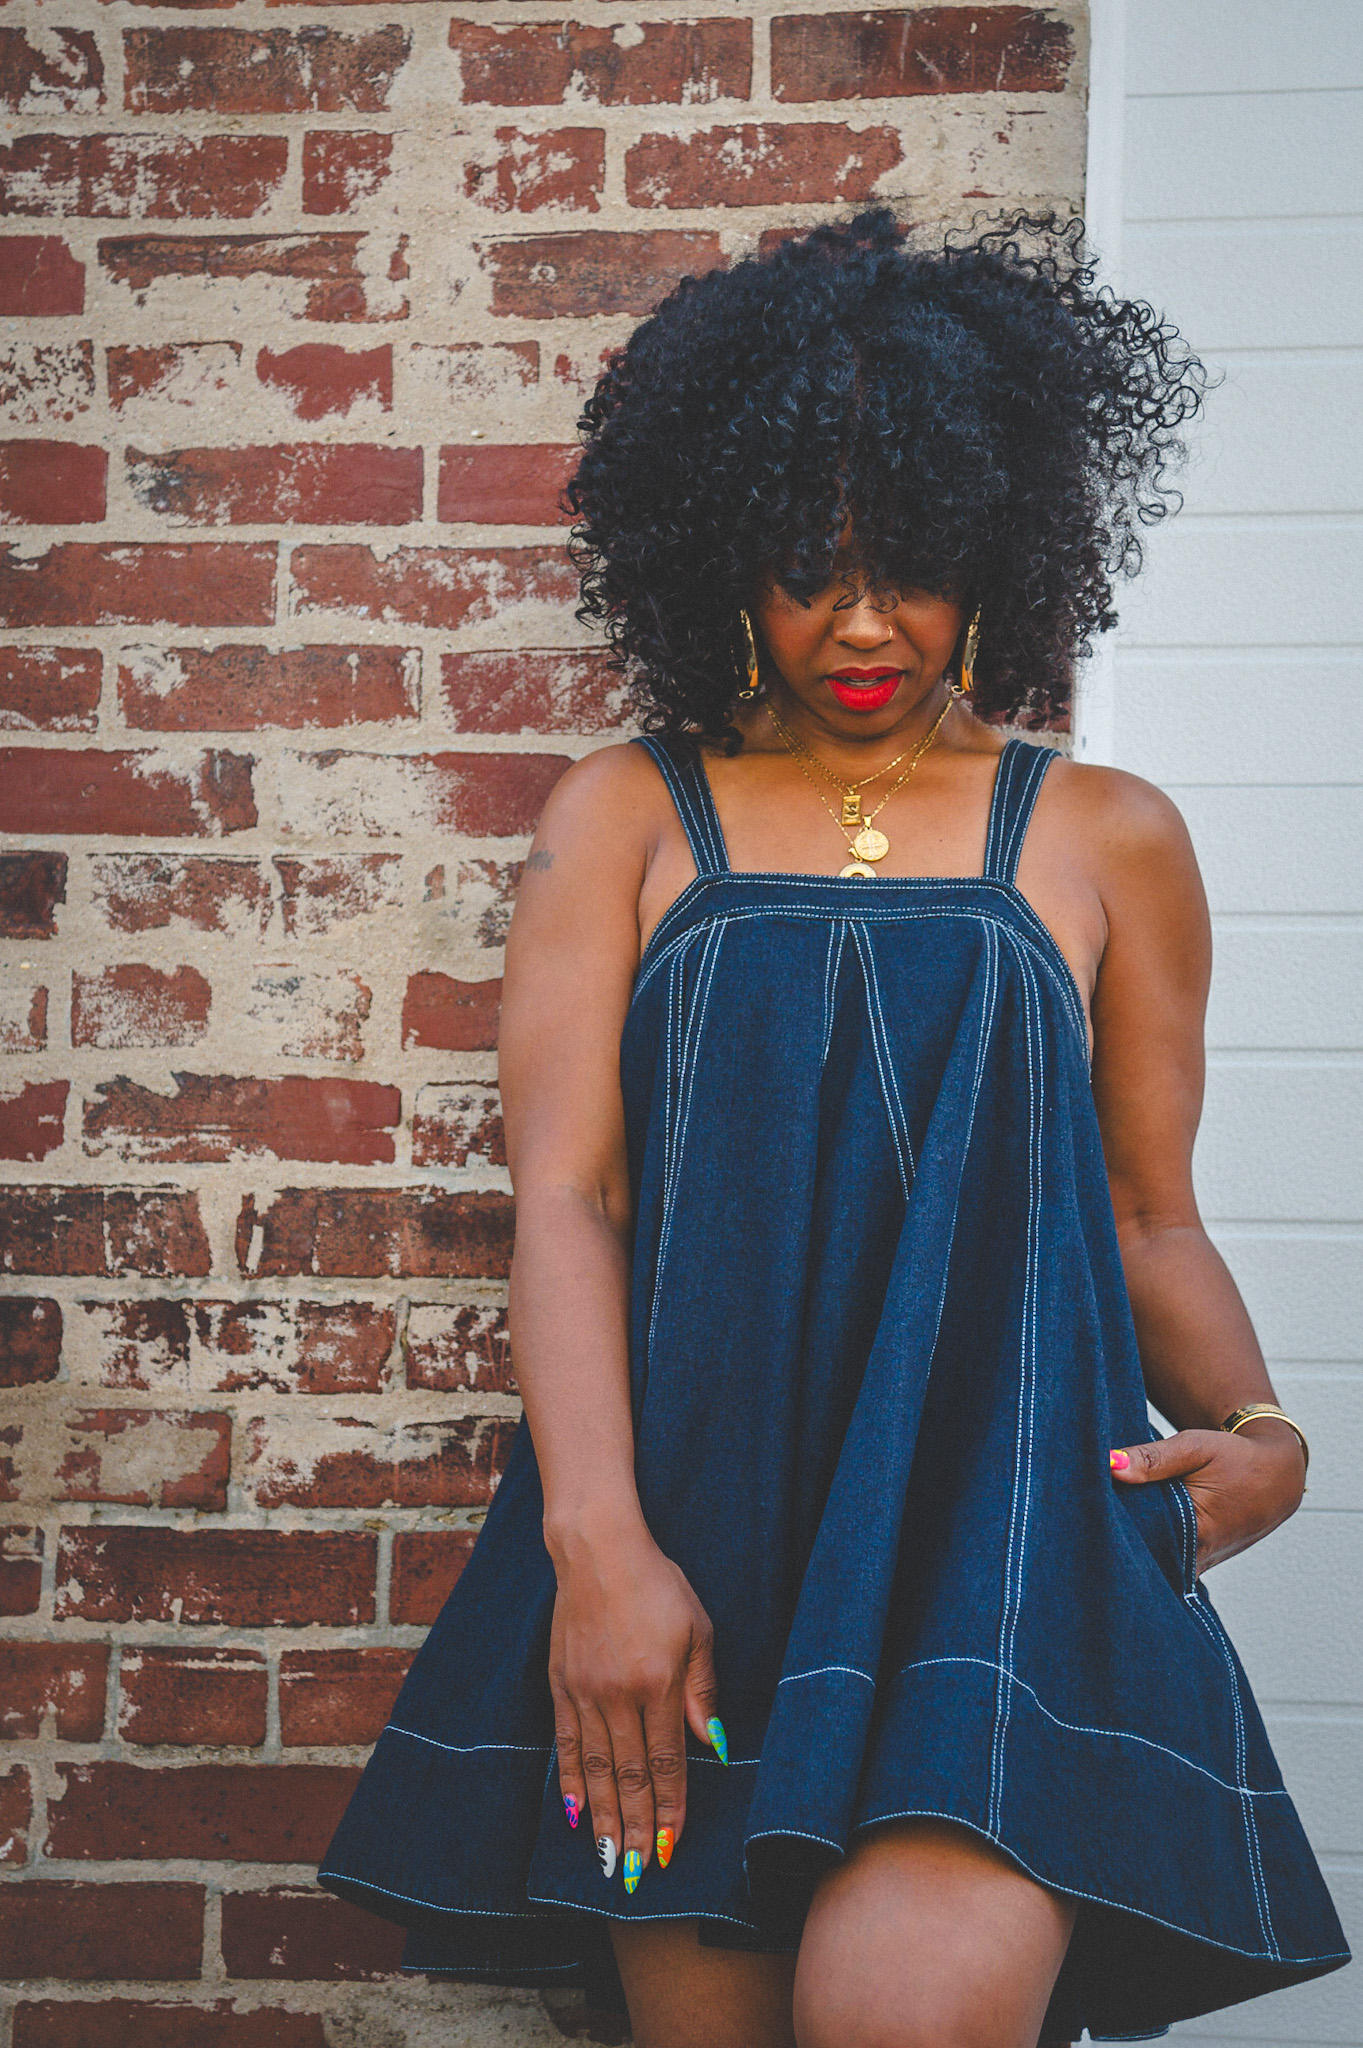 RELAXING WEEKEND OUTFIT IDEAS, SWEENEE STYLE, HOW TO DRESS FOR SUMMER, SUMMER OUTFIT IDEA, HOW TO WEAR A DENIM DRESS, DENIM DRESSES, INDIANAPOLIS STYLE BLOG, INDIANA FASHION BLOGGER